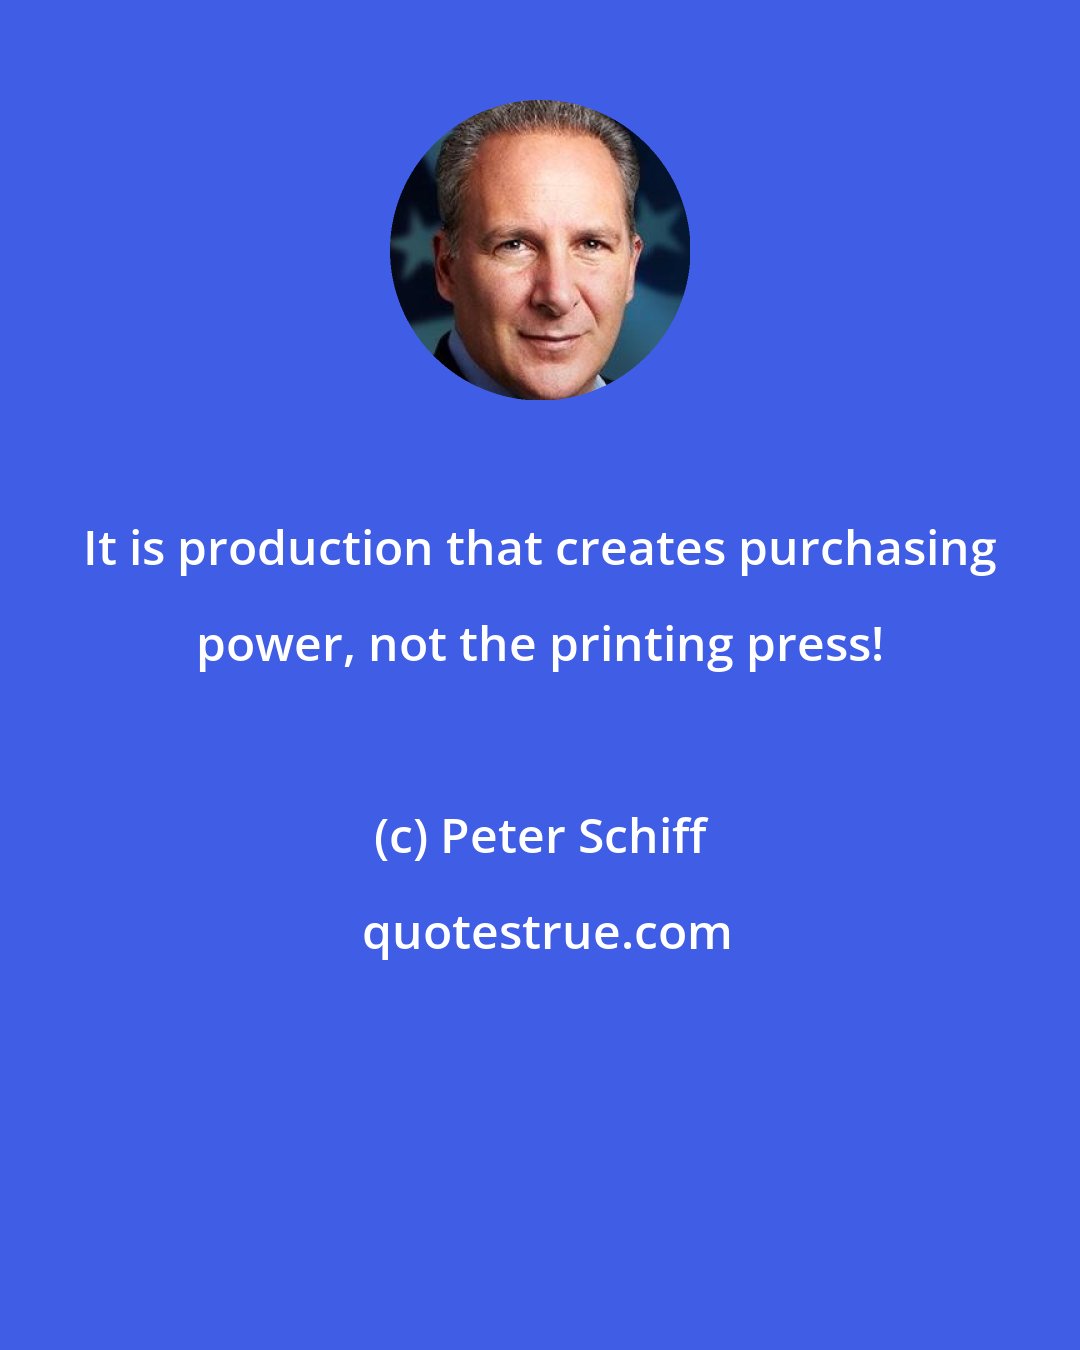 Peter Schiff: It is production that creates purchasing power, not the printing press!